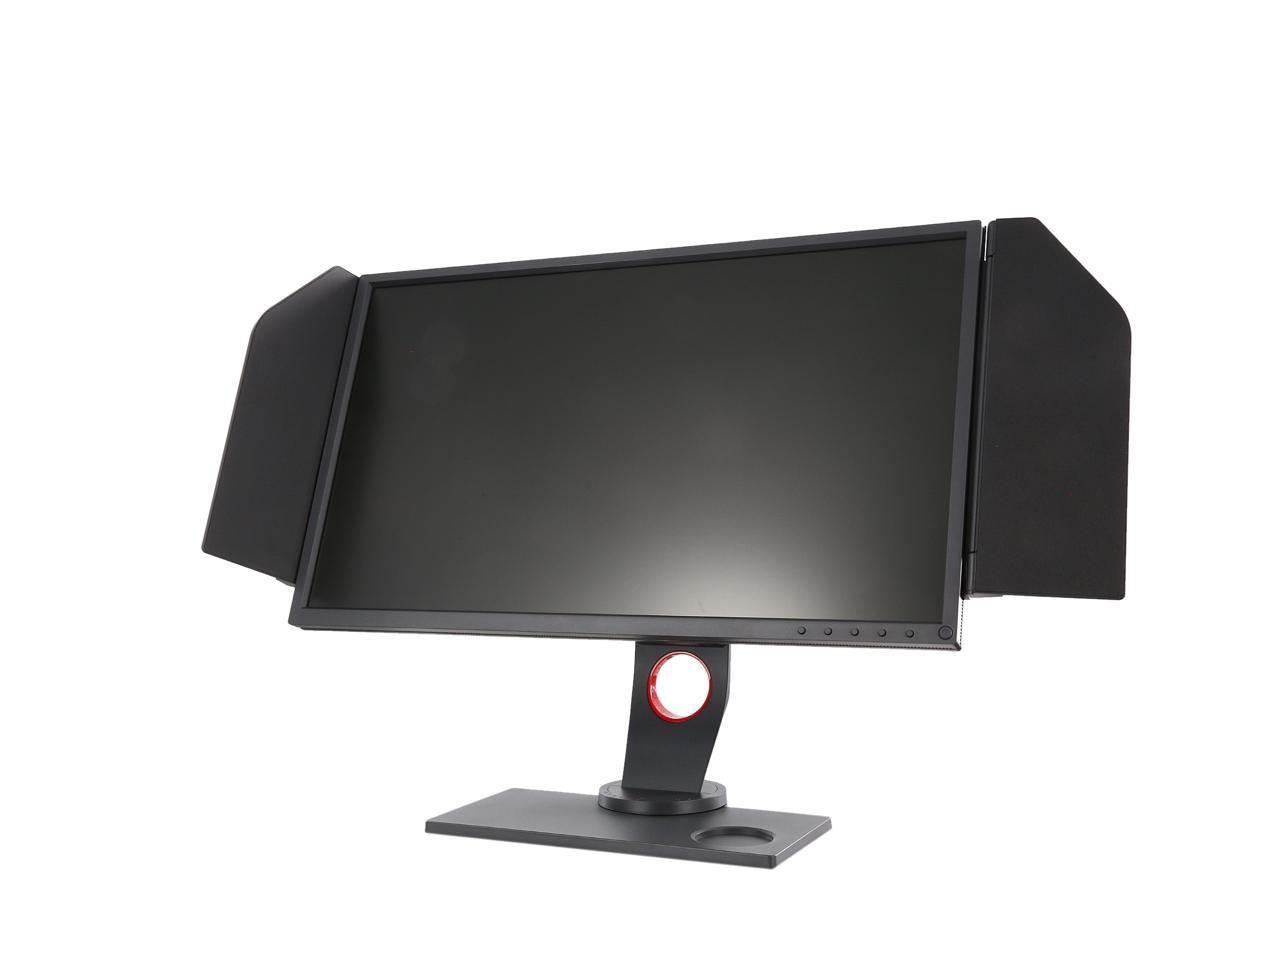 Open Box Benq Zowie Xl2546 25 Actaul Size 24 5 1080p 1ms Gtg 240hz Esports Gaming Monitor Dyac S Switch Shield Black Equalizer Color Vibrance Height Adjustable Vesa Ready Newegg Com